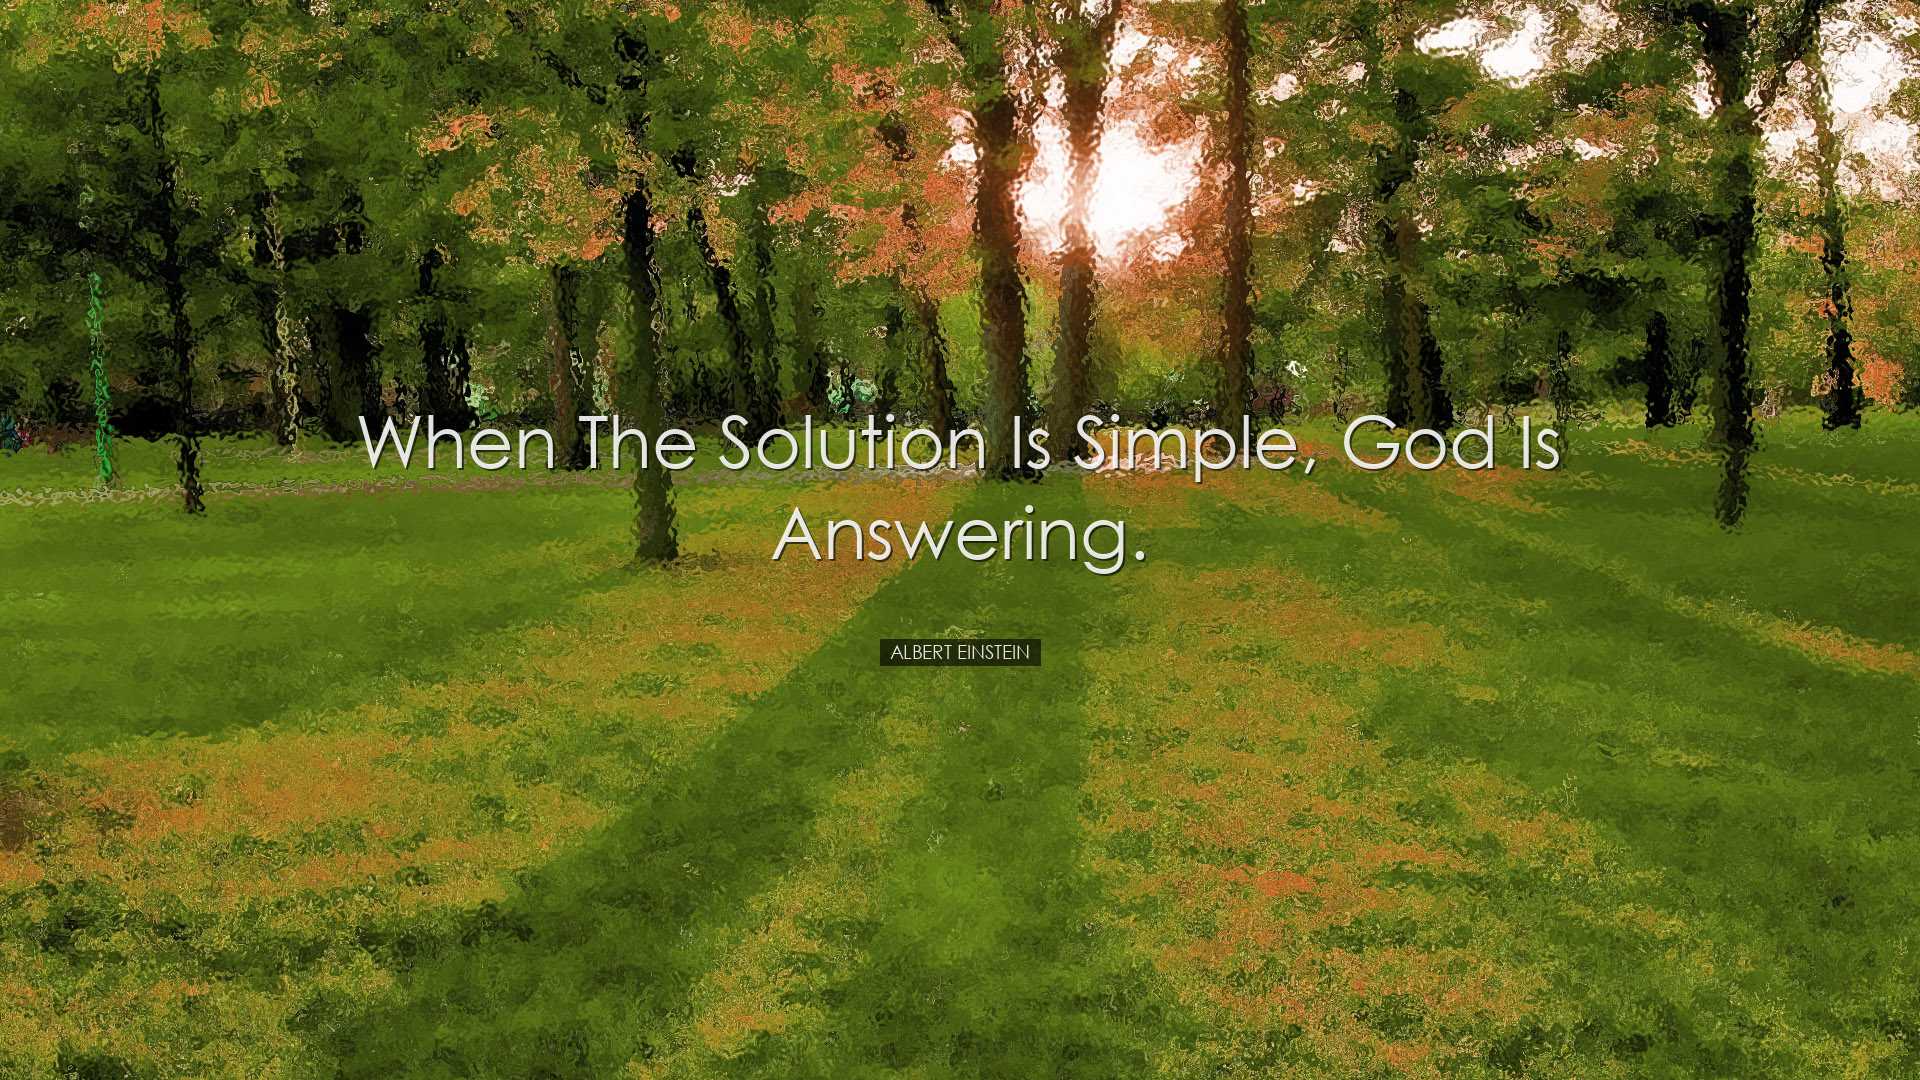 When the solution is simple, God is answering. - Albert Einstein